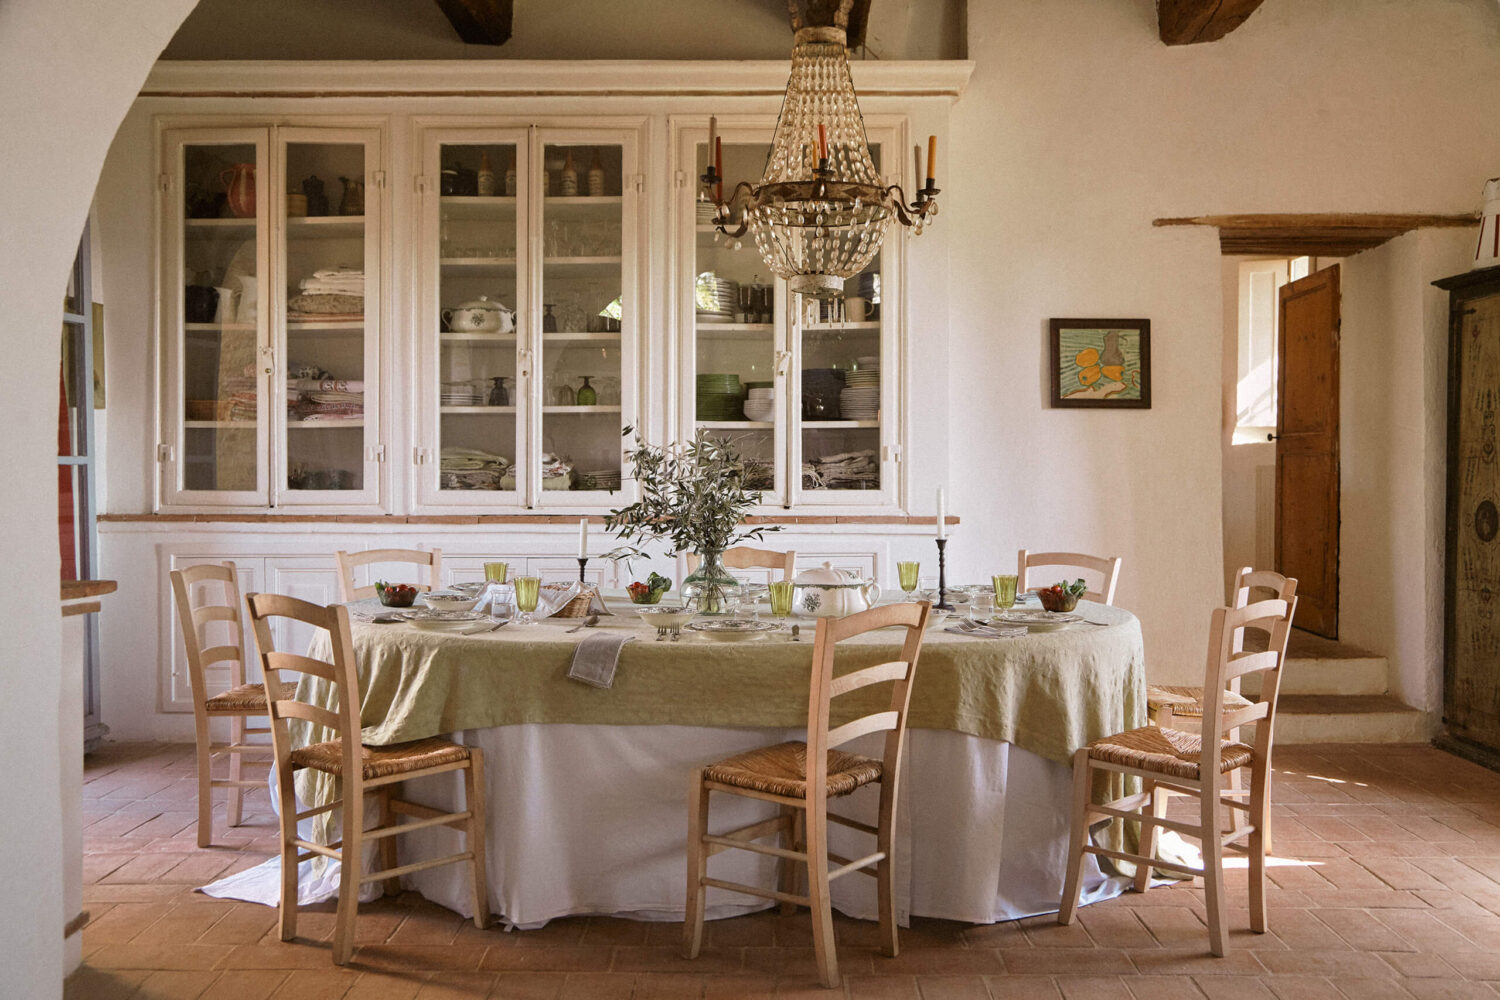 rustic-kitchen-dining-table-mediterranean-style-zara-home-villa-tuscany-nordroom